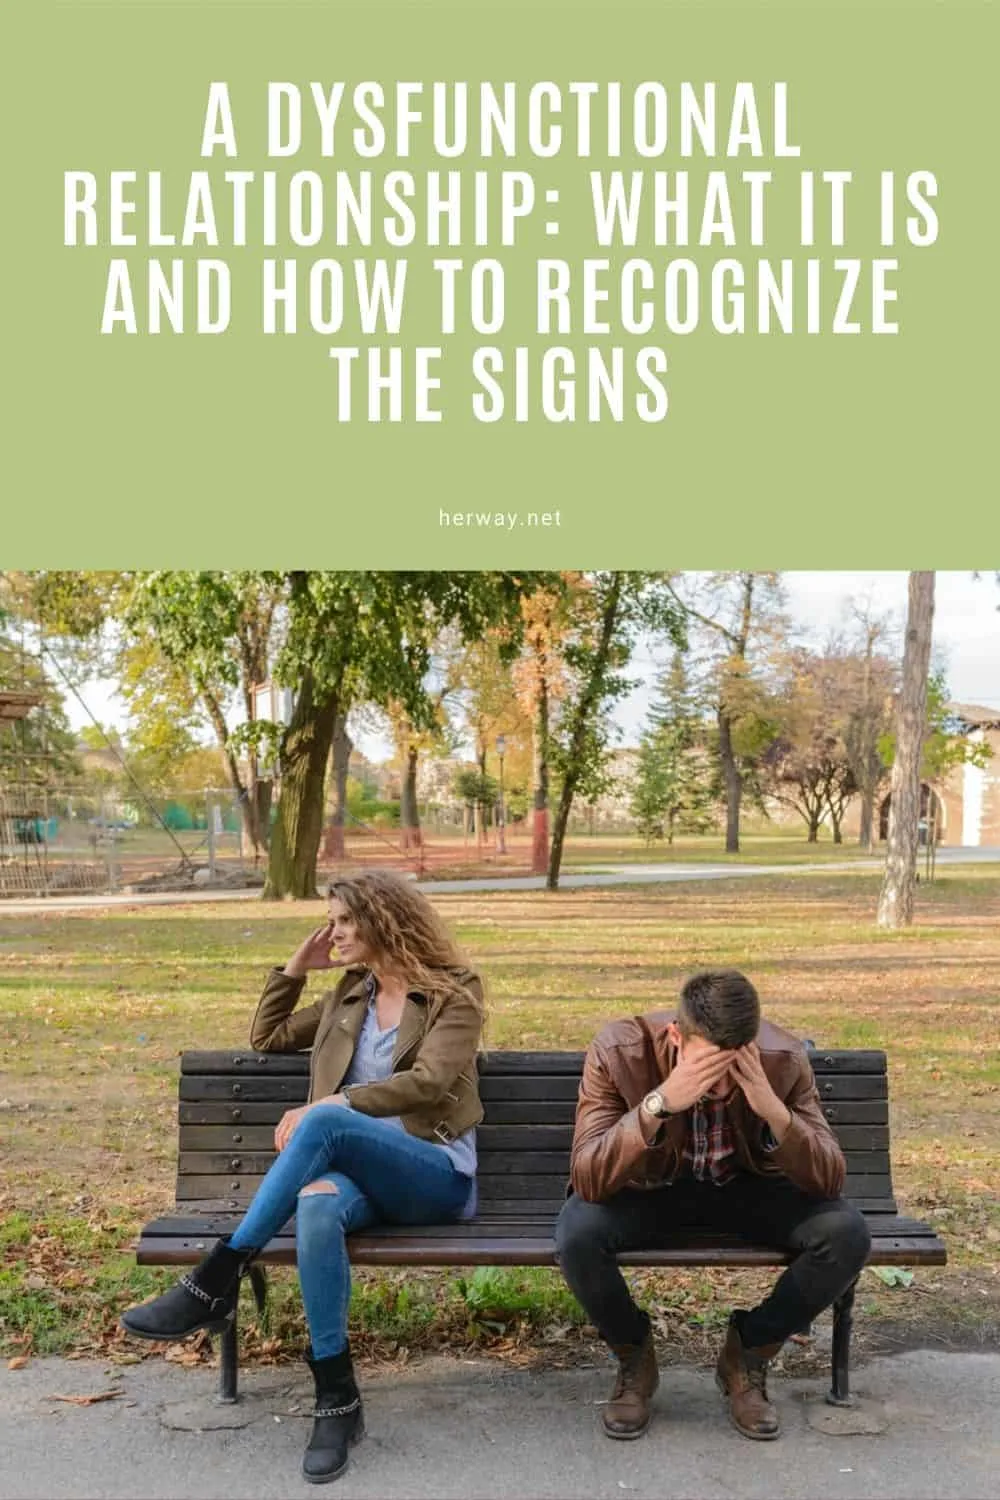 A Dysfunctional Relationship: What It Is And How To Recognize The Signs